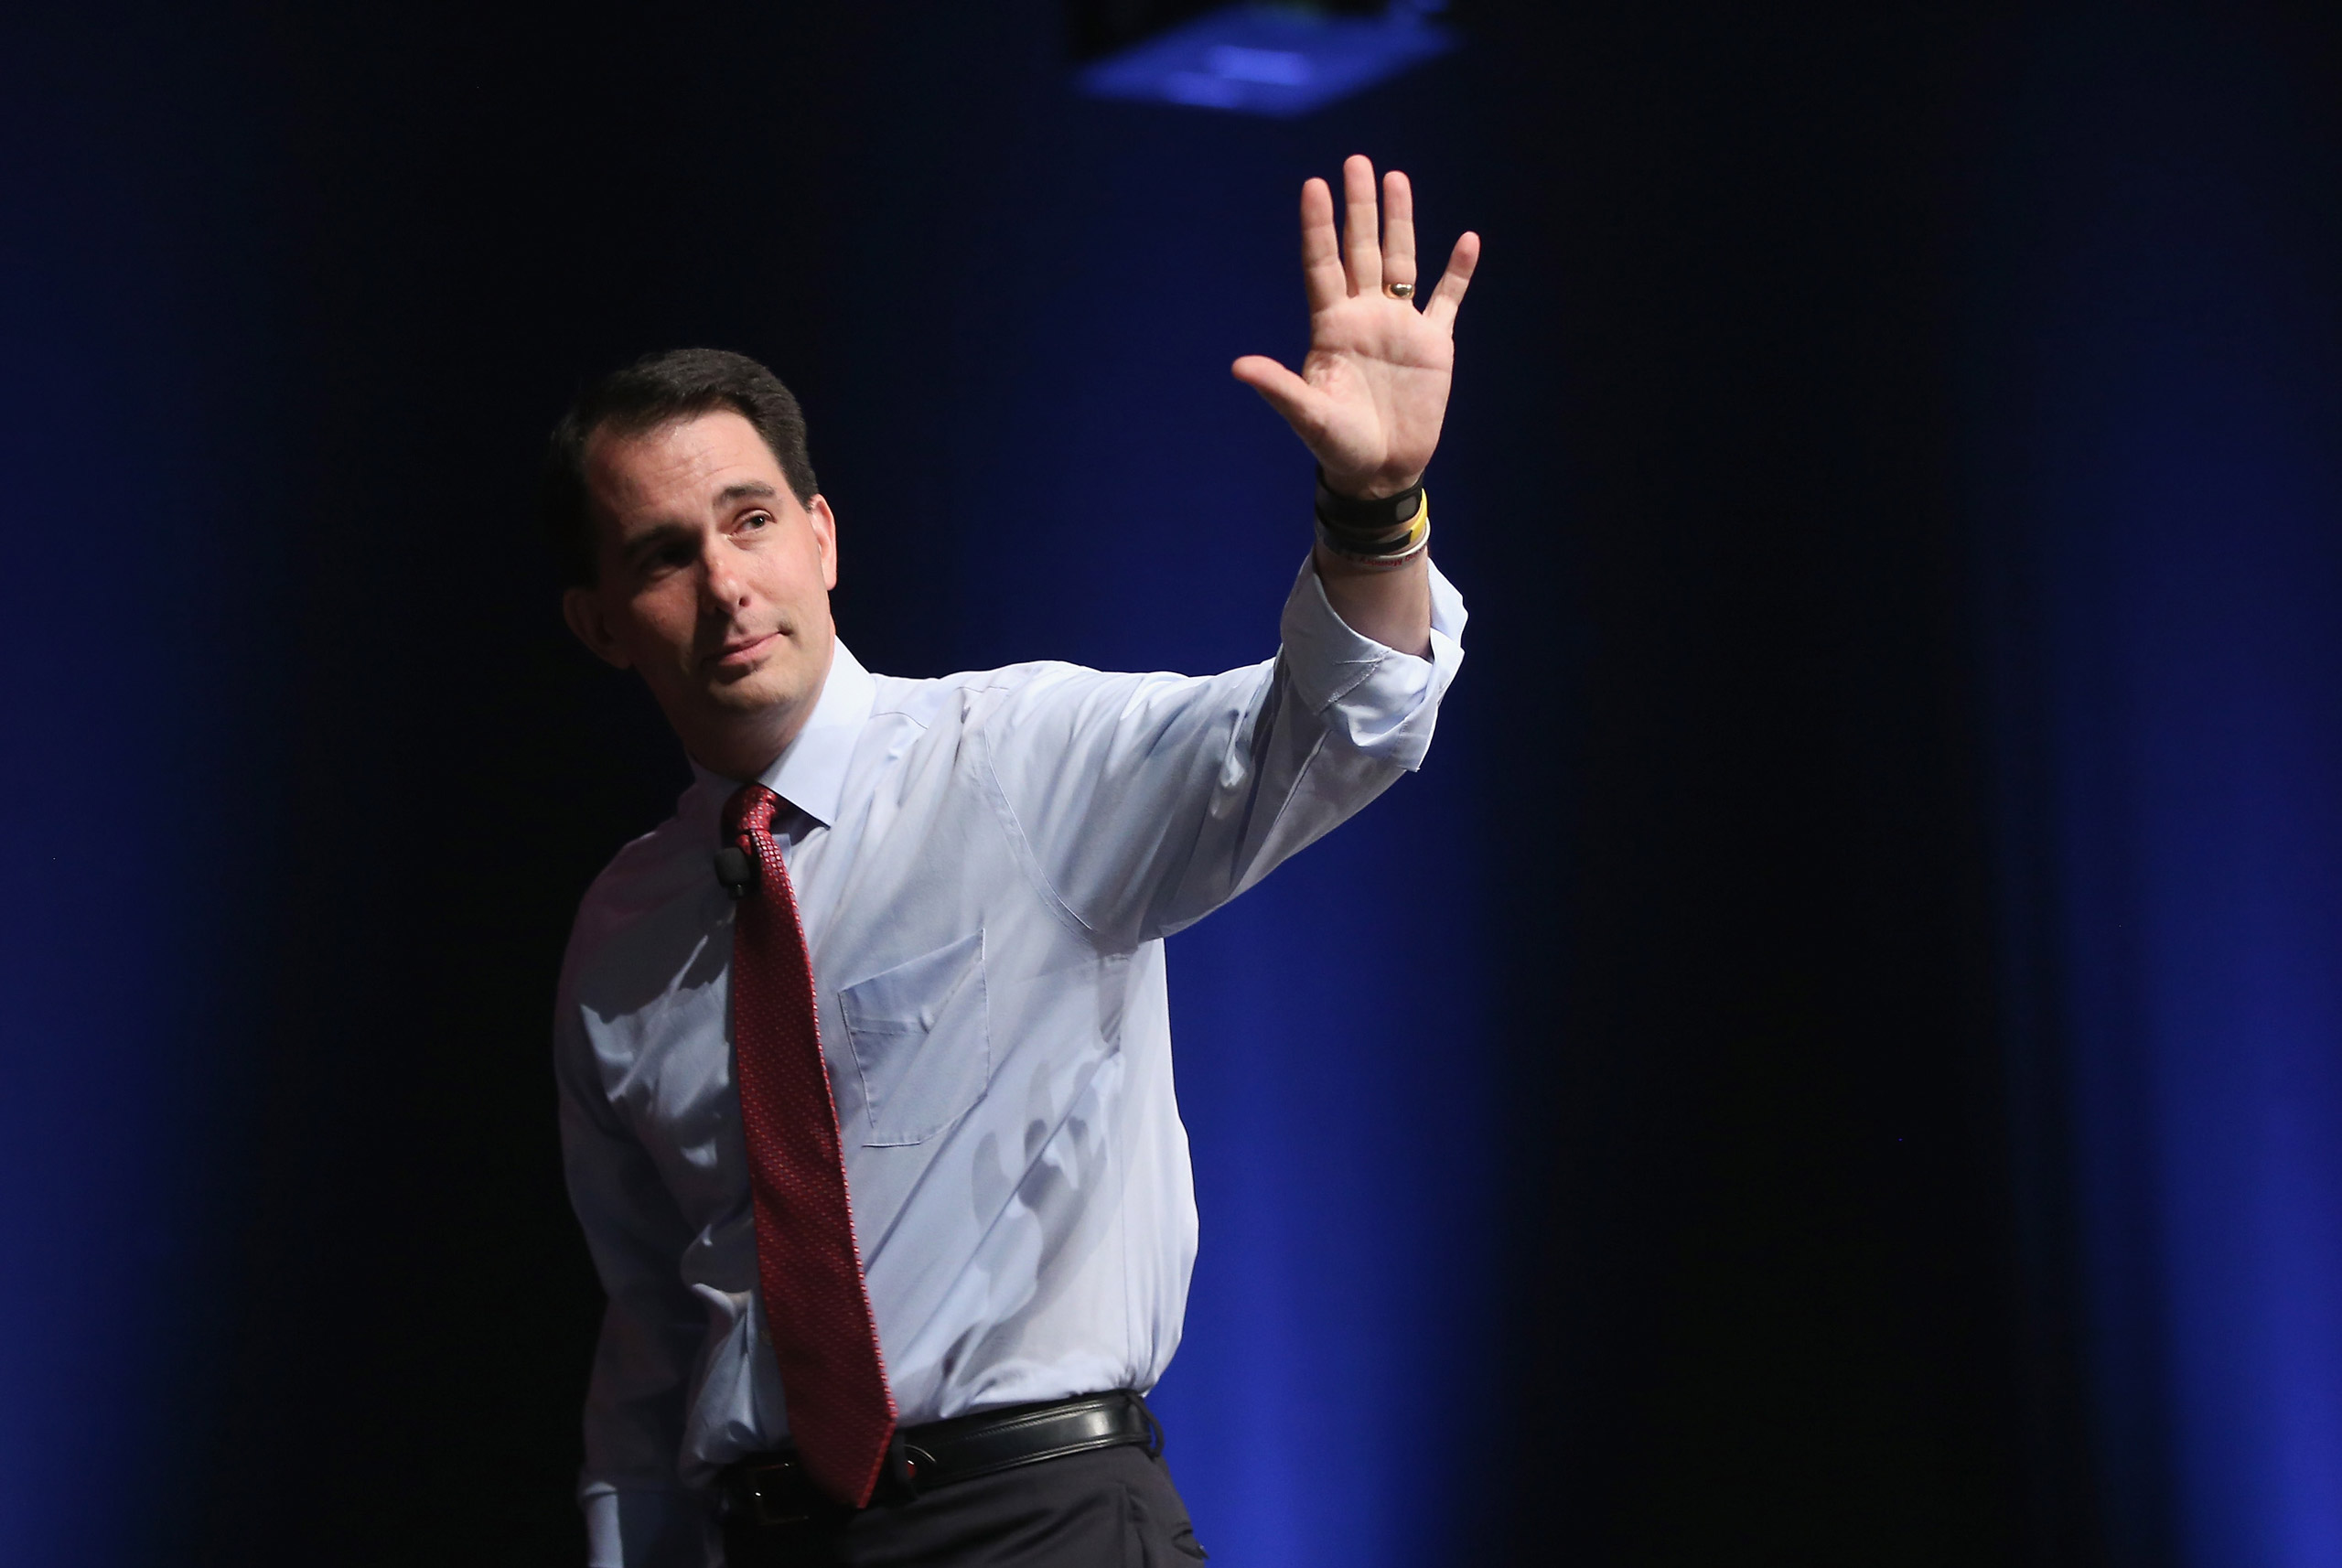 Wisconsin Governor Scott Walker greets guests at The Family Leadership Summit at Stephens Auditorium in Ames, Iowa, on July 18, 2015. (Scott Olson—Getty Images)